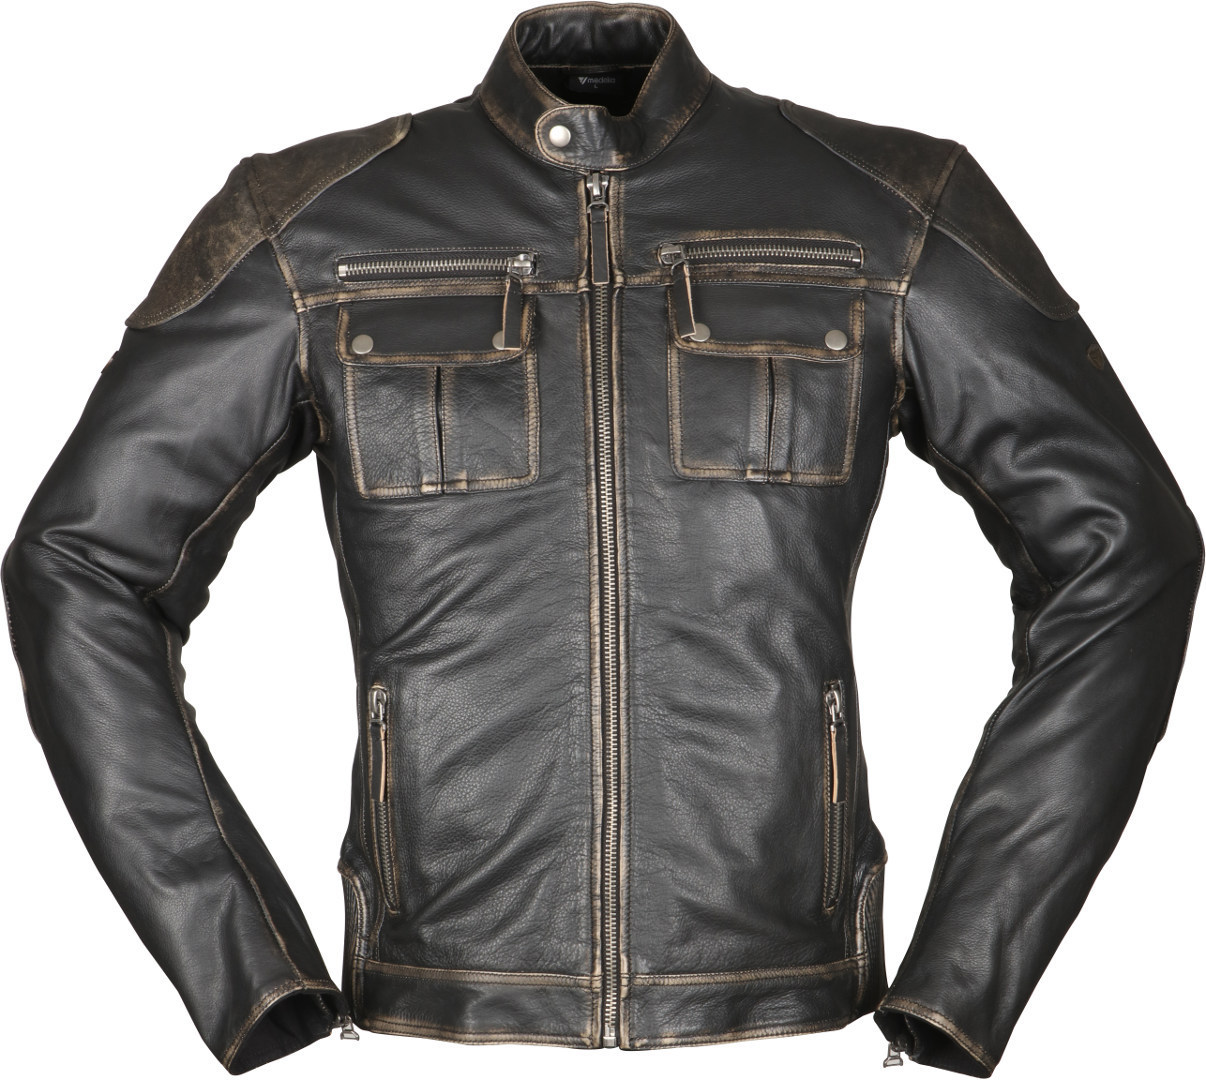 Image of Modeka Carlson Motorcycle Leater Giacca, marrone, dimensione 4XL